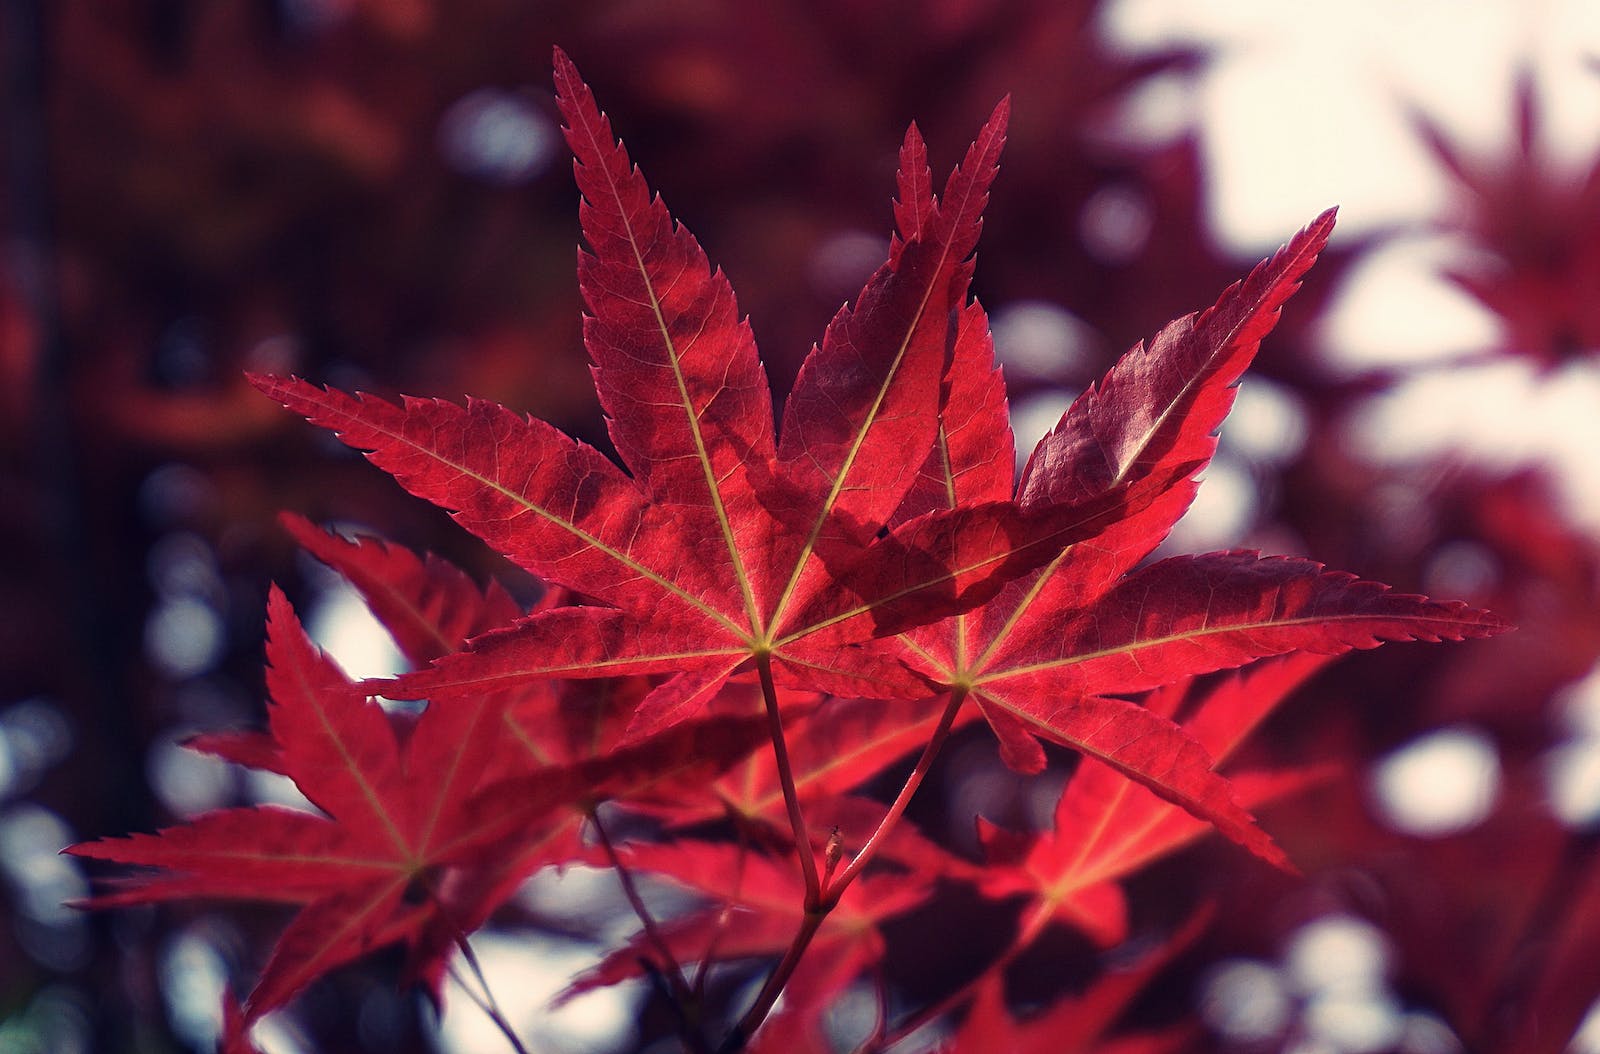 Bright-Red leaves with yellow veins, growing out of tiny red stems. 

